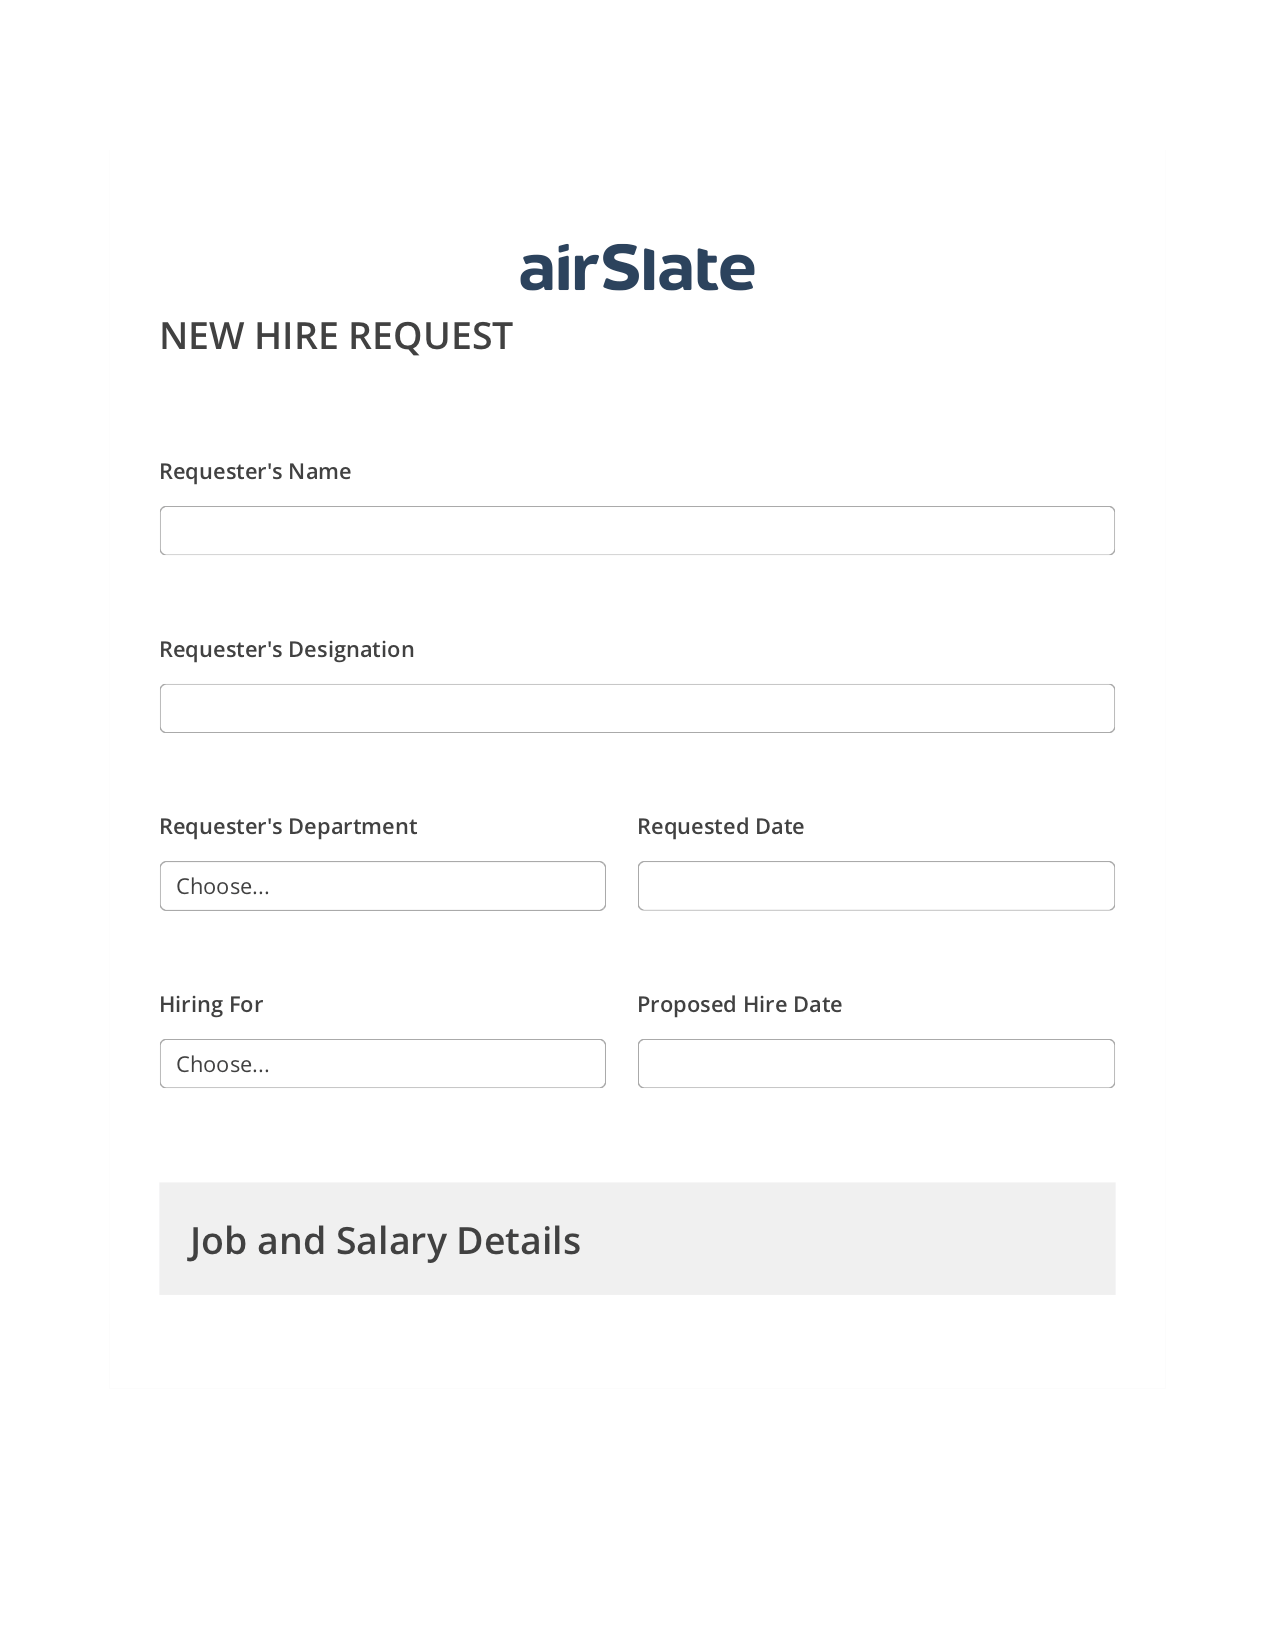 Hiring Request Workflow Pre-fill from another Slate Bot, Create slate from another Flow Bot, Archive to Google Drive Bot